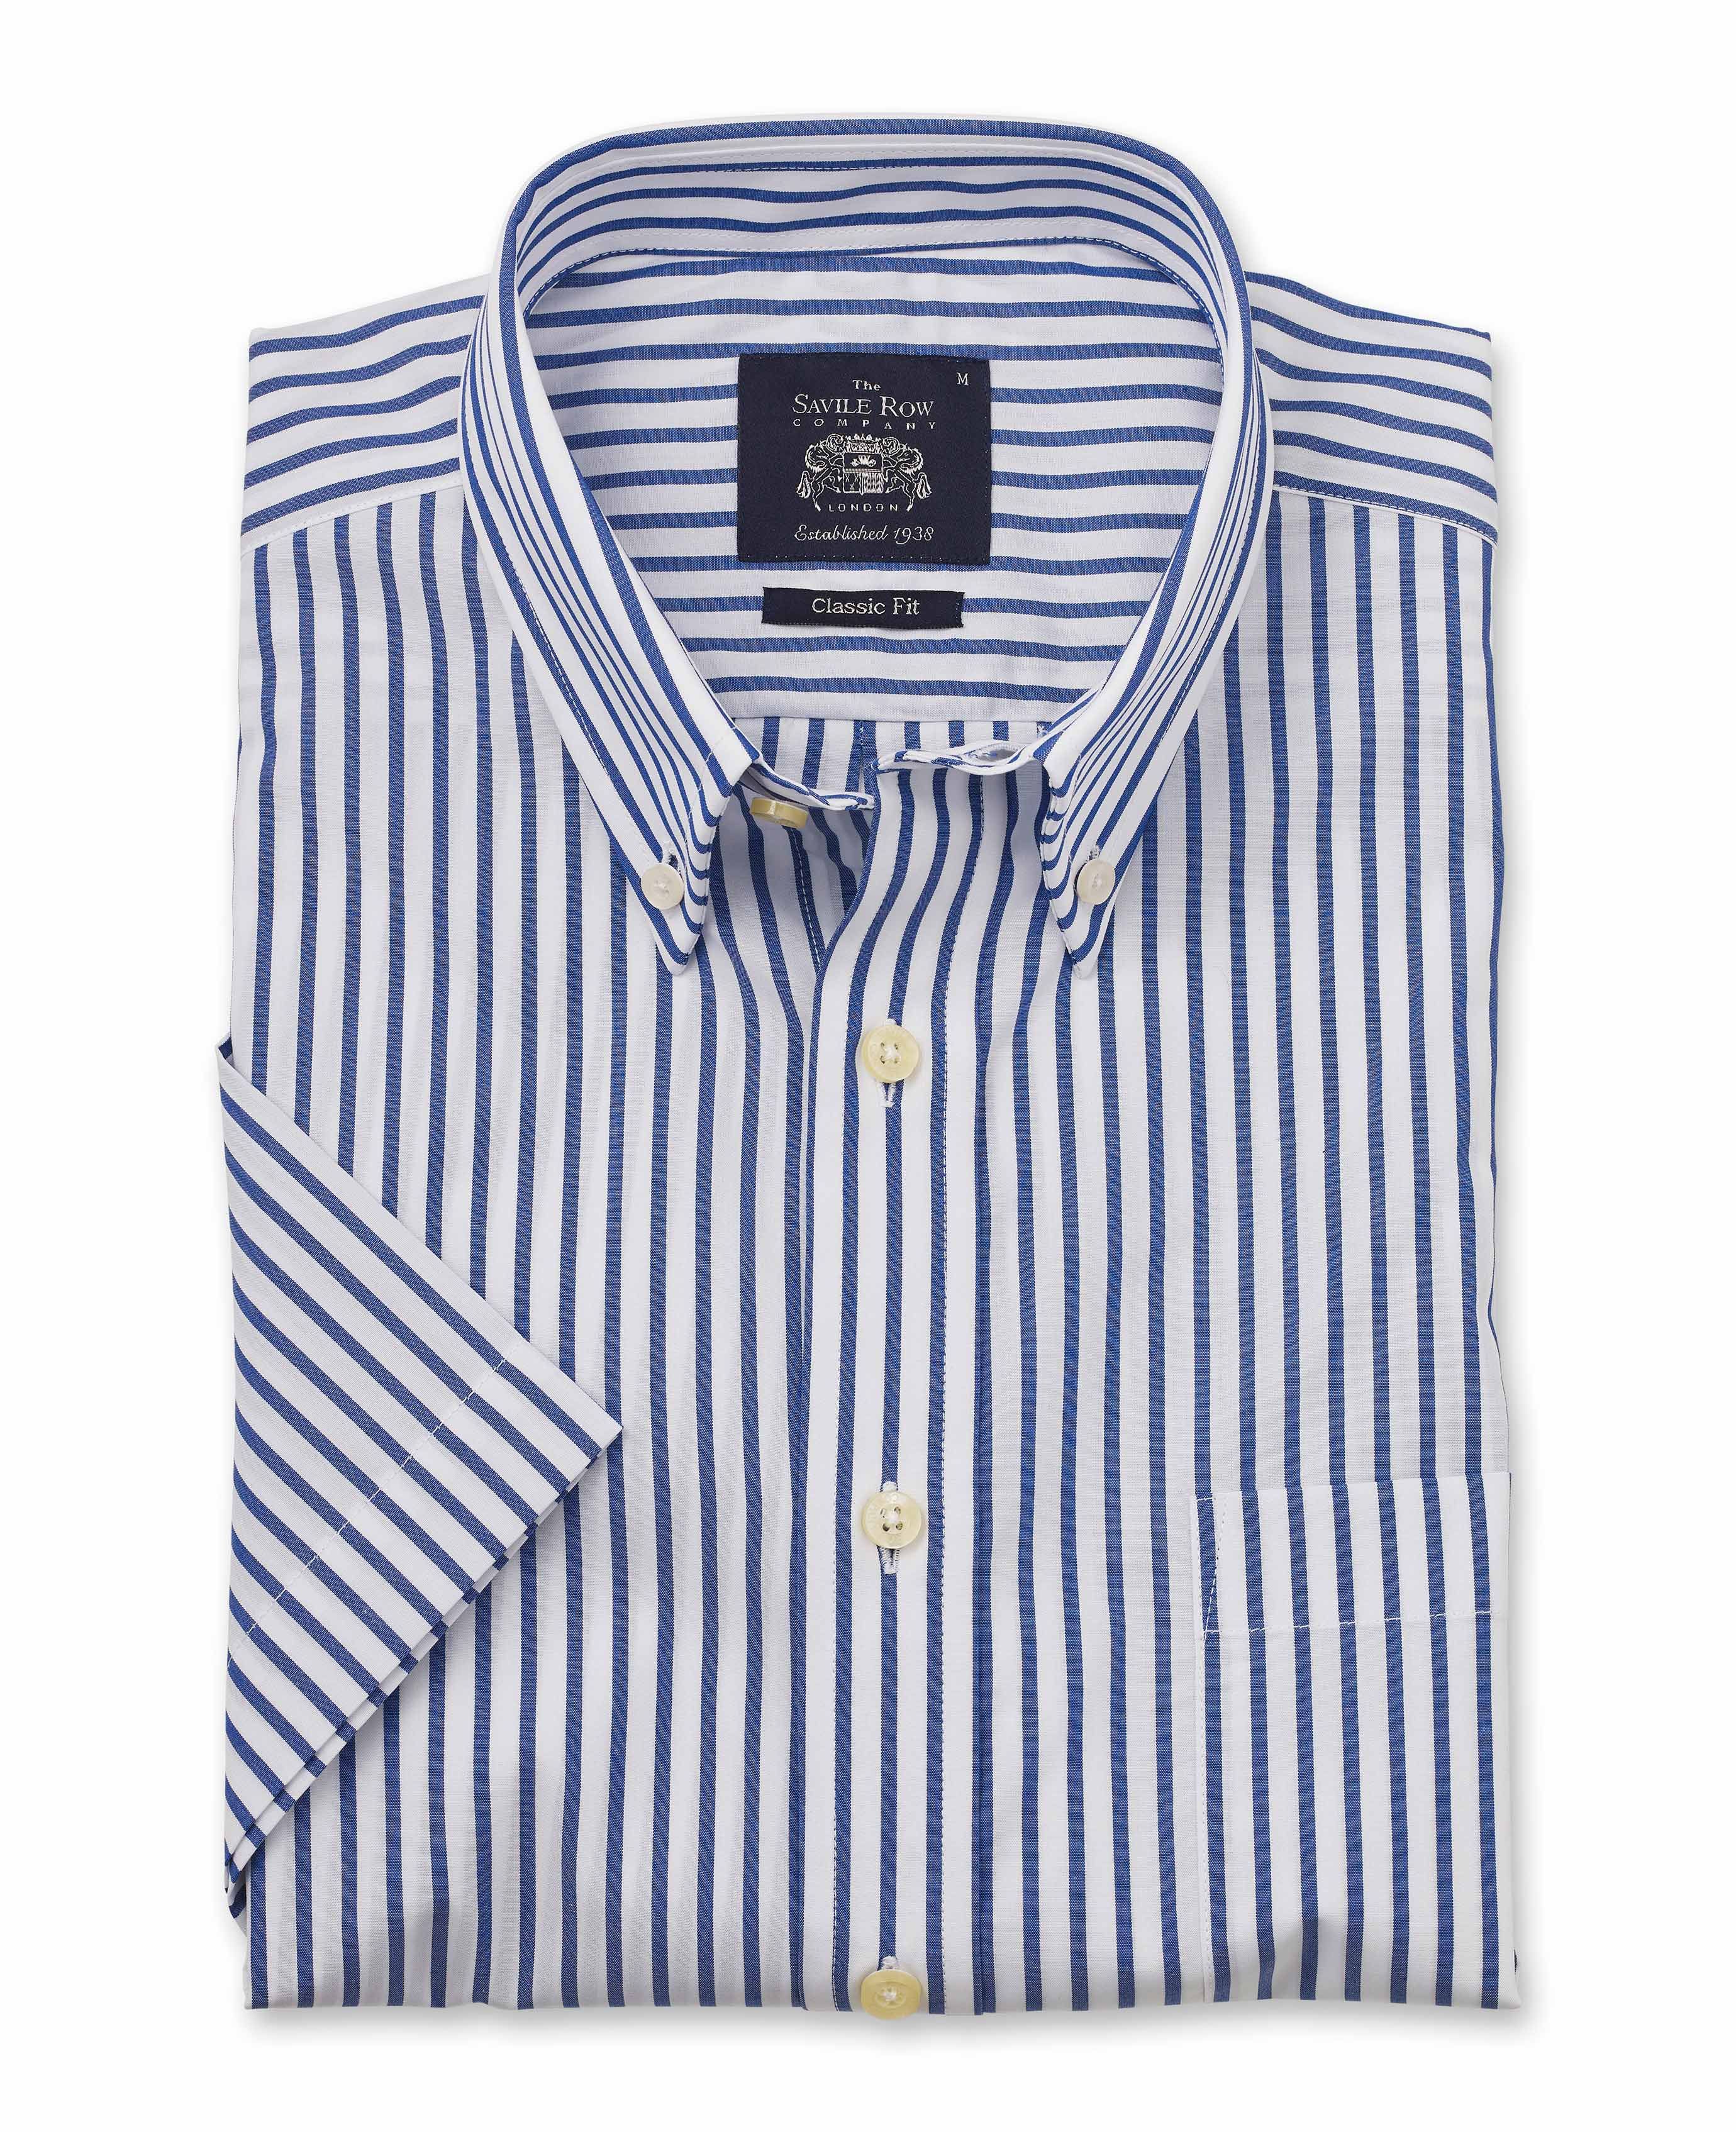 Classic White Shirt With Blue Stripes